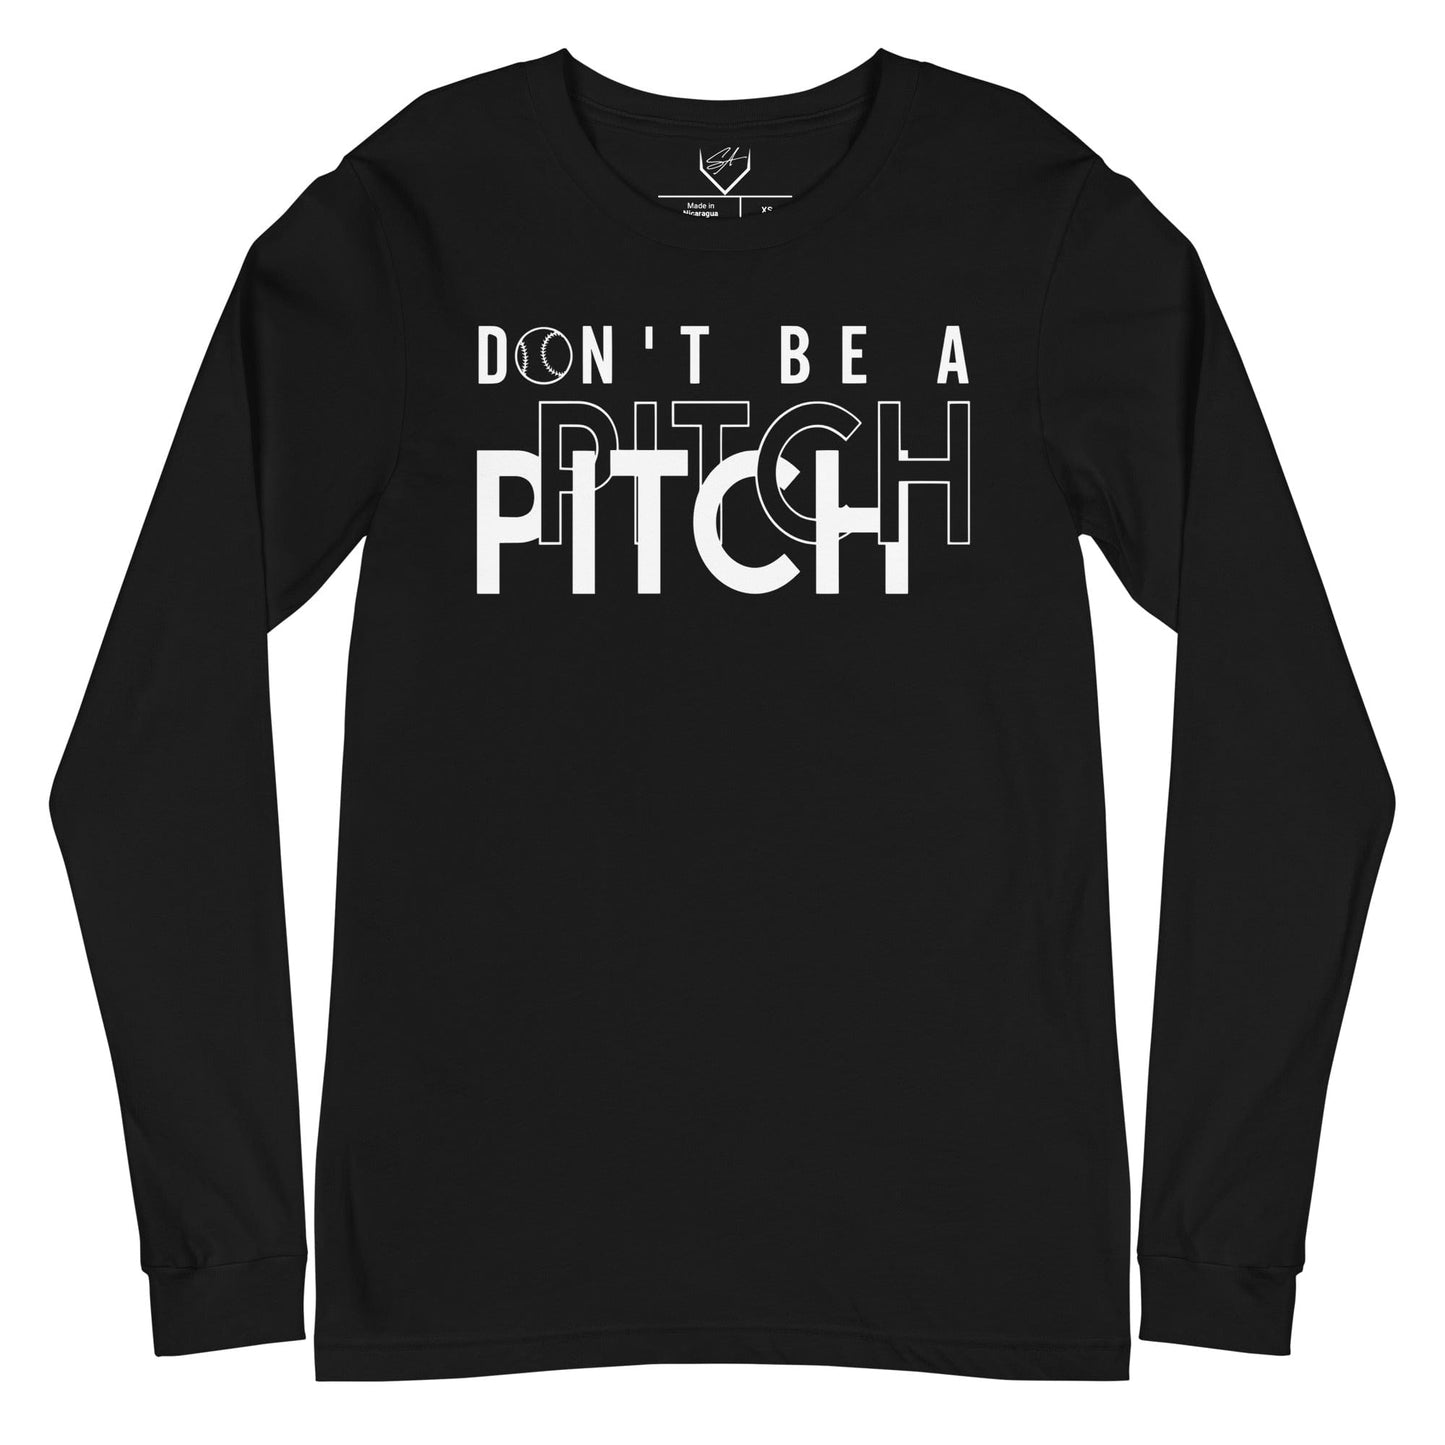 Don't Be A Pitch - Adult Long Sleeve